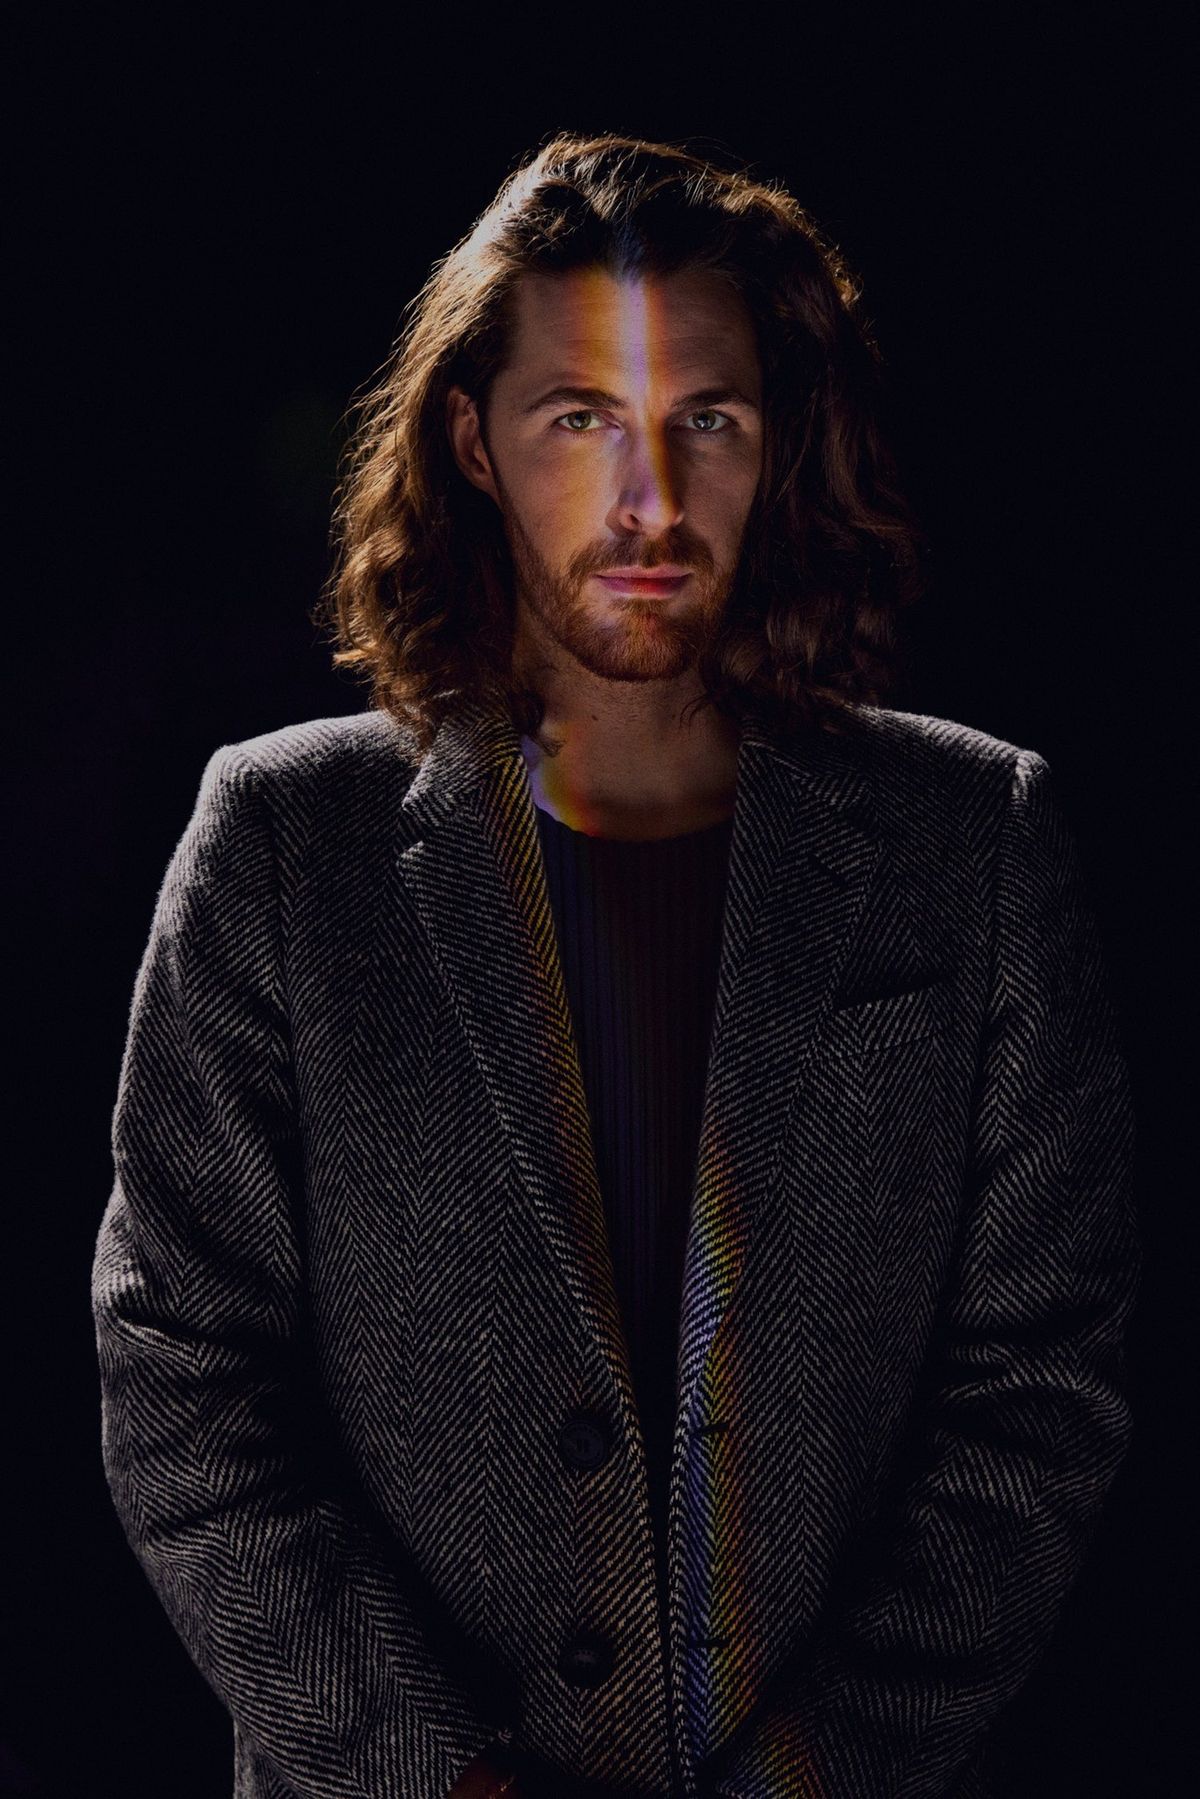 Hozier with support from Brittany Howard and Lord Huron